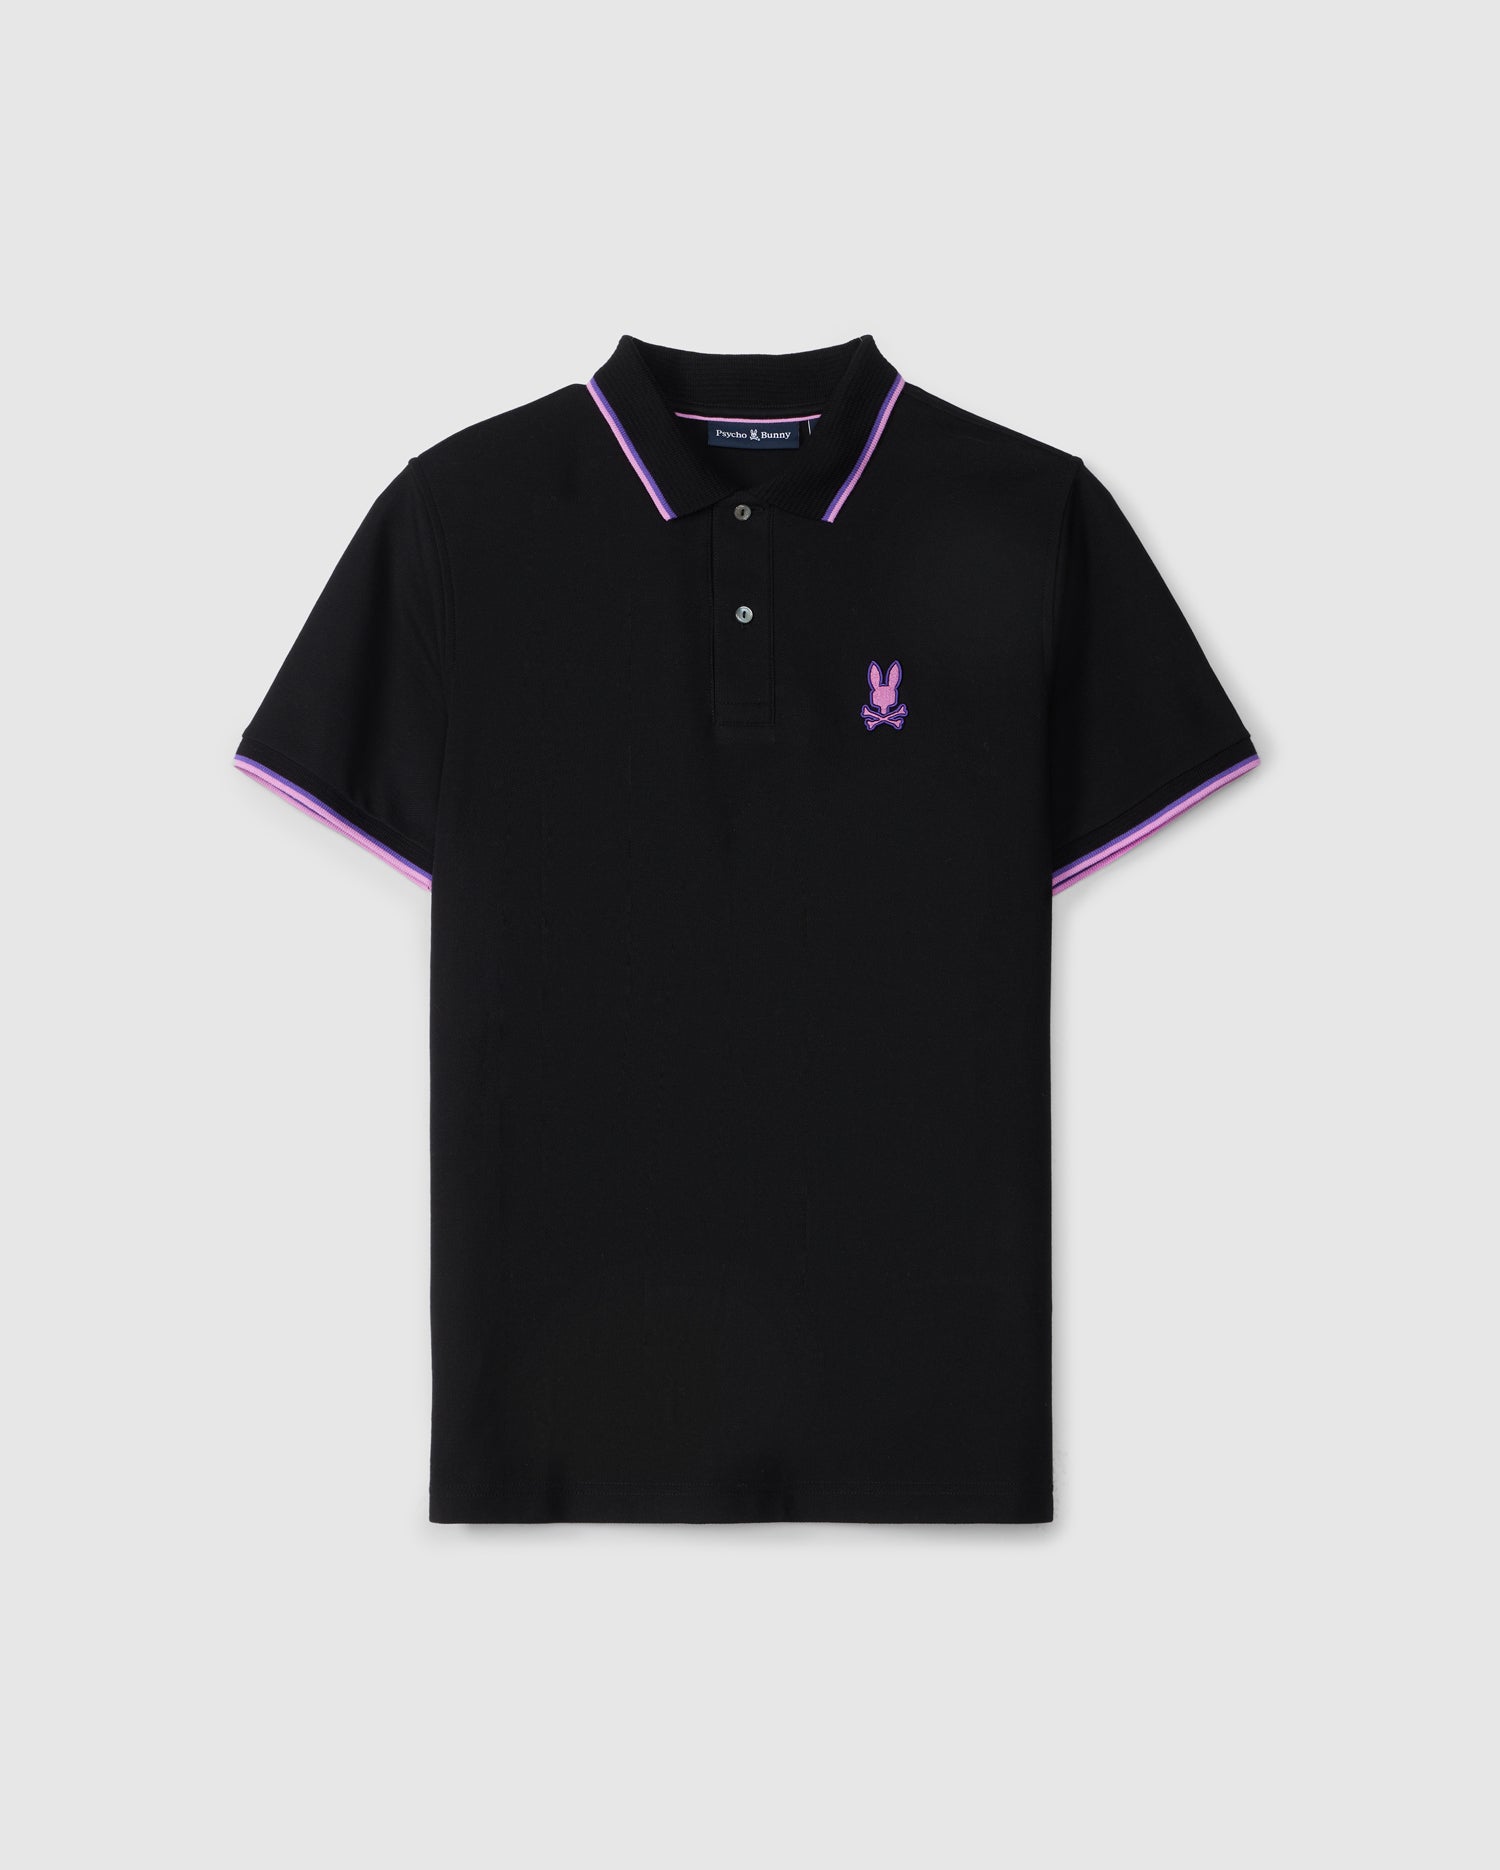 A black MENS HOUSTON PIQUE POLO SHIRT with a purple striped collar and sleeve trims, featuring a small embroidered purple Psycho Bunny logo on the left chest, displayed against a plain light background.